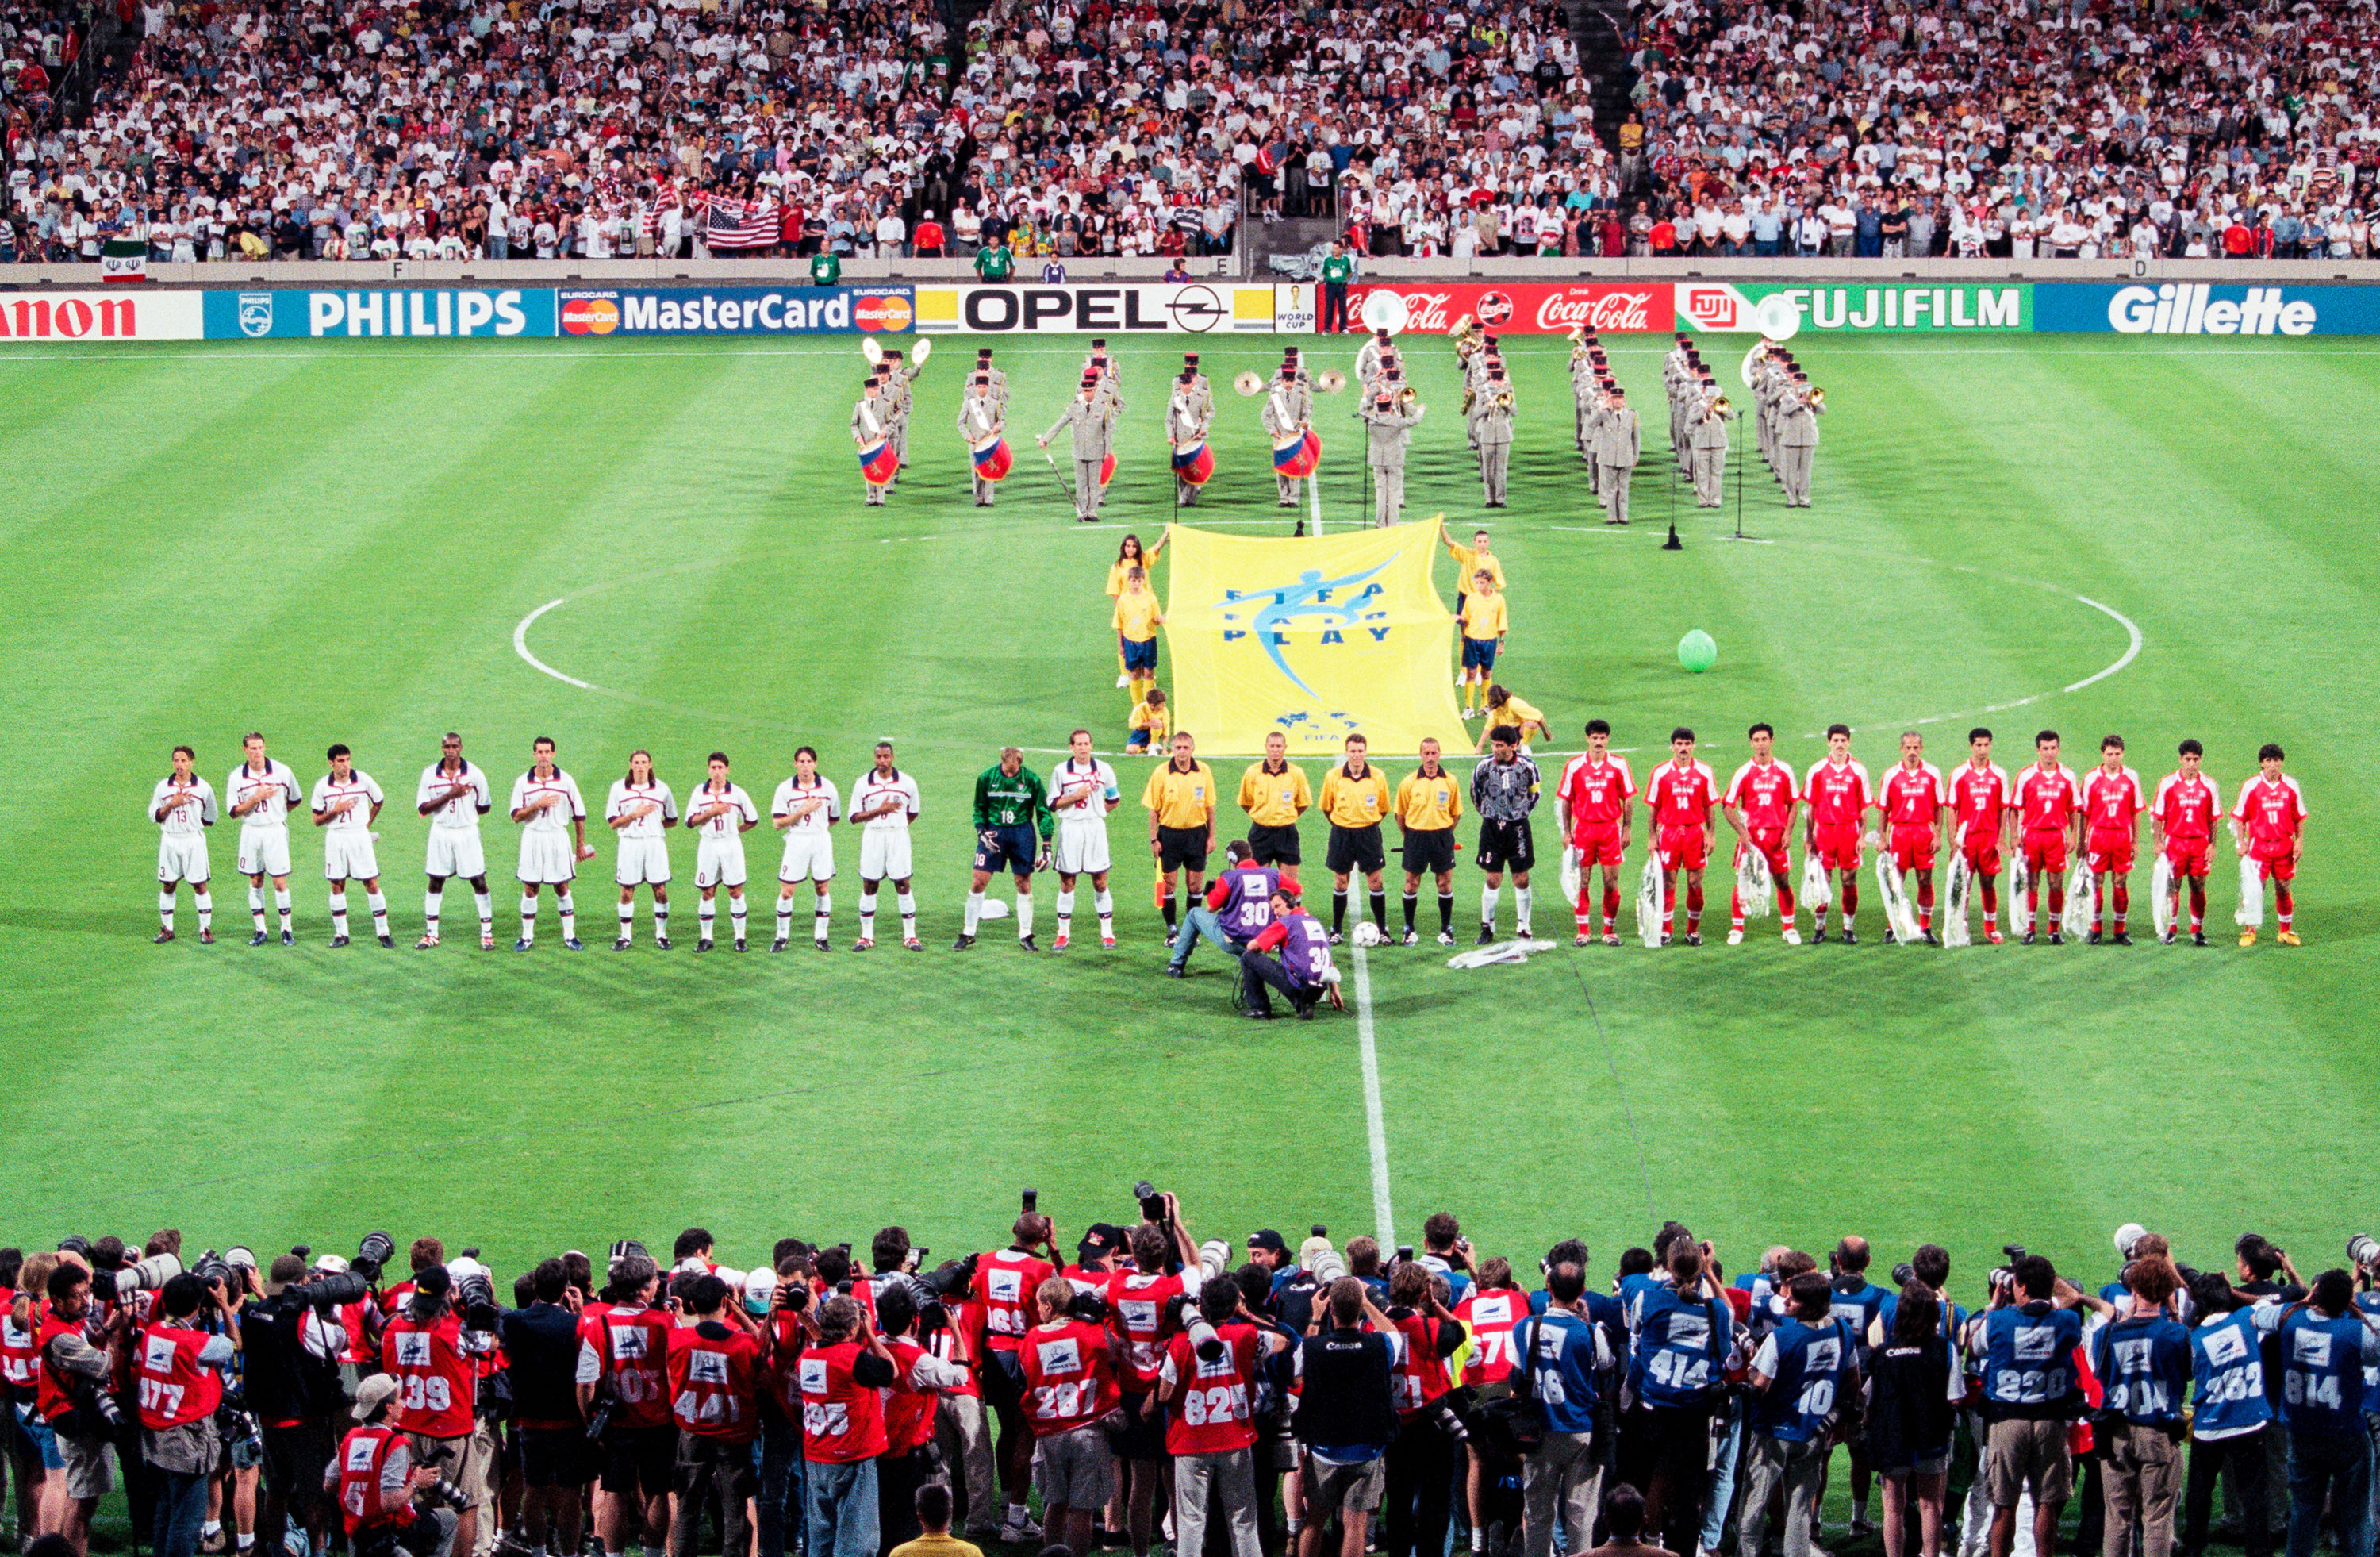 The US and Iran soccer teams line up before their World Cup match in 1998 in Lyon, France.